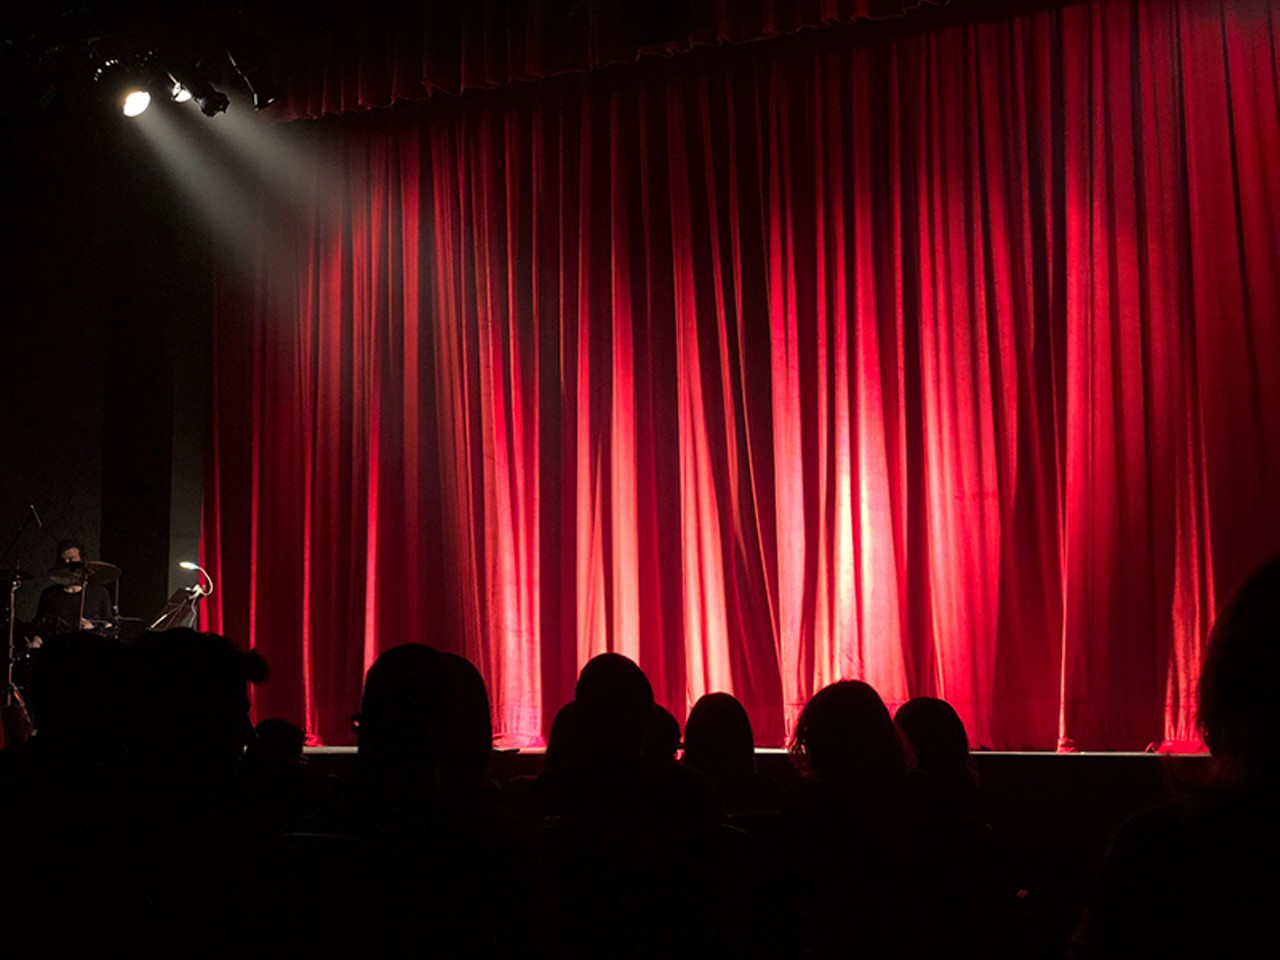 I is for improv classes
American Stage offers improv classes, and we&#146;ve heard from former students that they&#146;re fun and worthwhile.
Who to gift: Your friend who binge-watches Whose Line Is It Anyway? 
What to gift: The classes, along with a copy of Don&#146;t Think Twice.
Photo via  pexels.com.